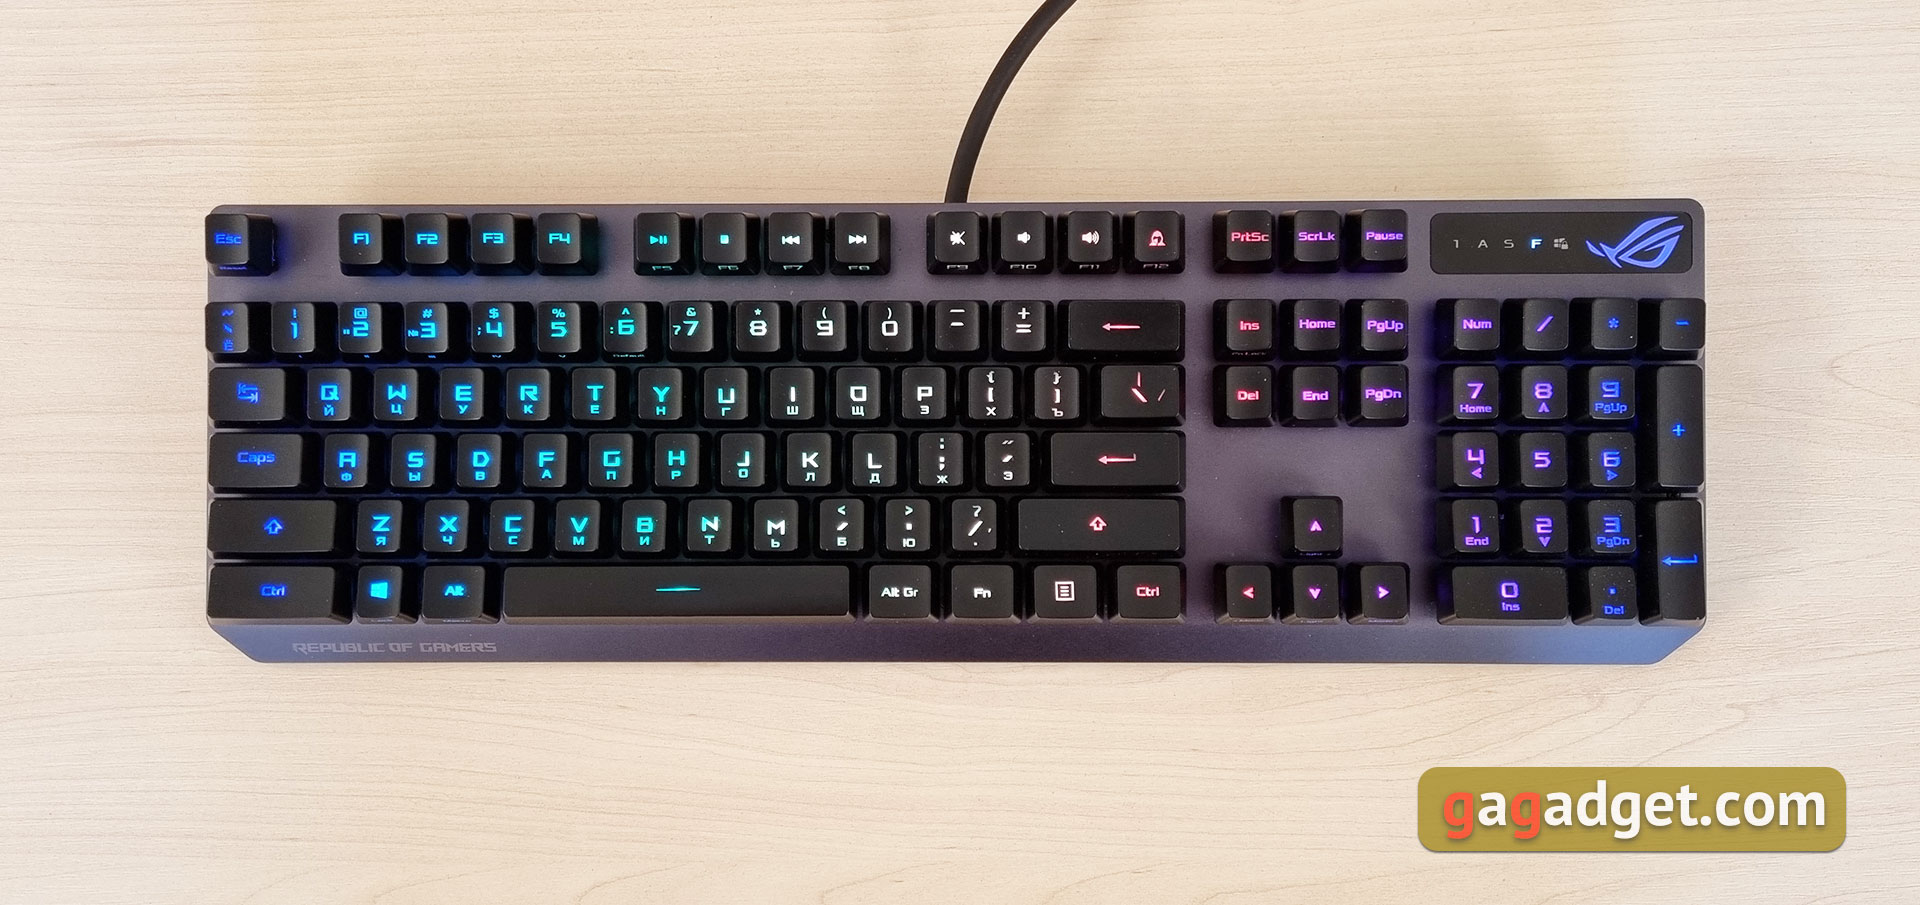 ASUS ROG Strix Scope RX Review: an Opto-Mechanical Gaming Keyboard with Water Protection-23